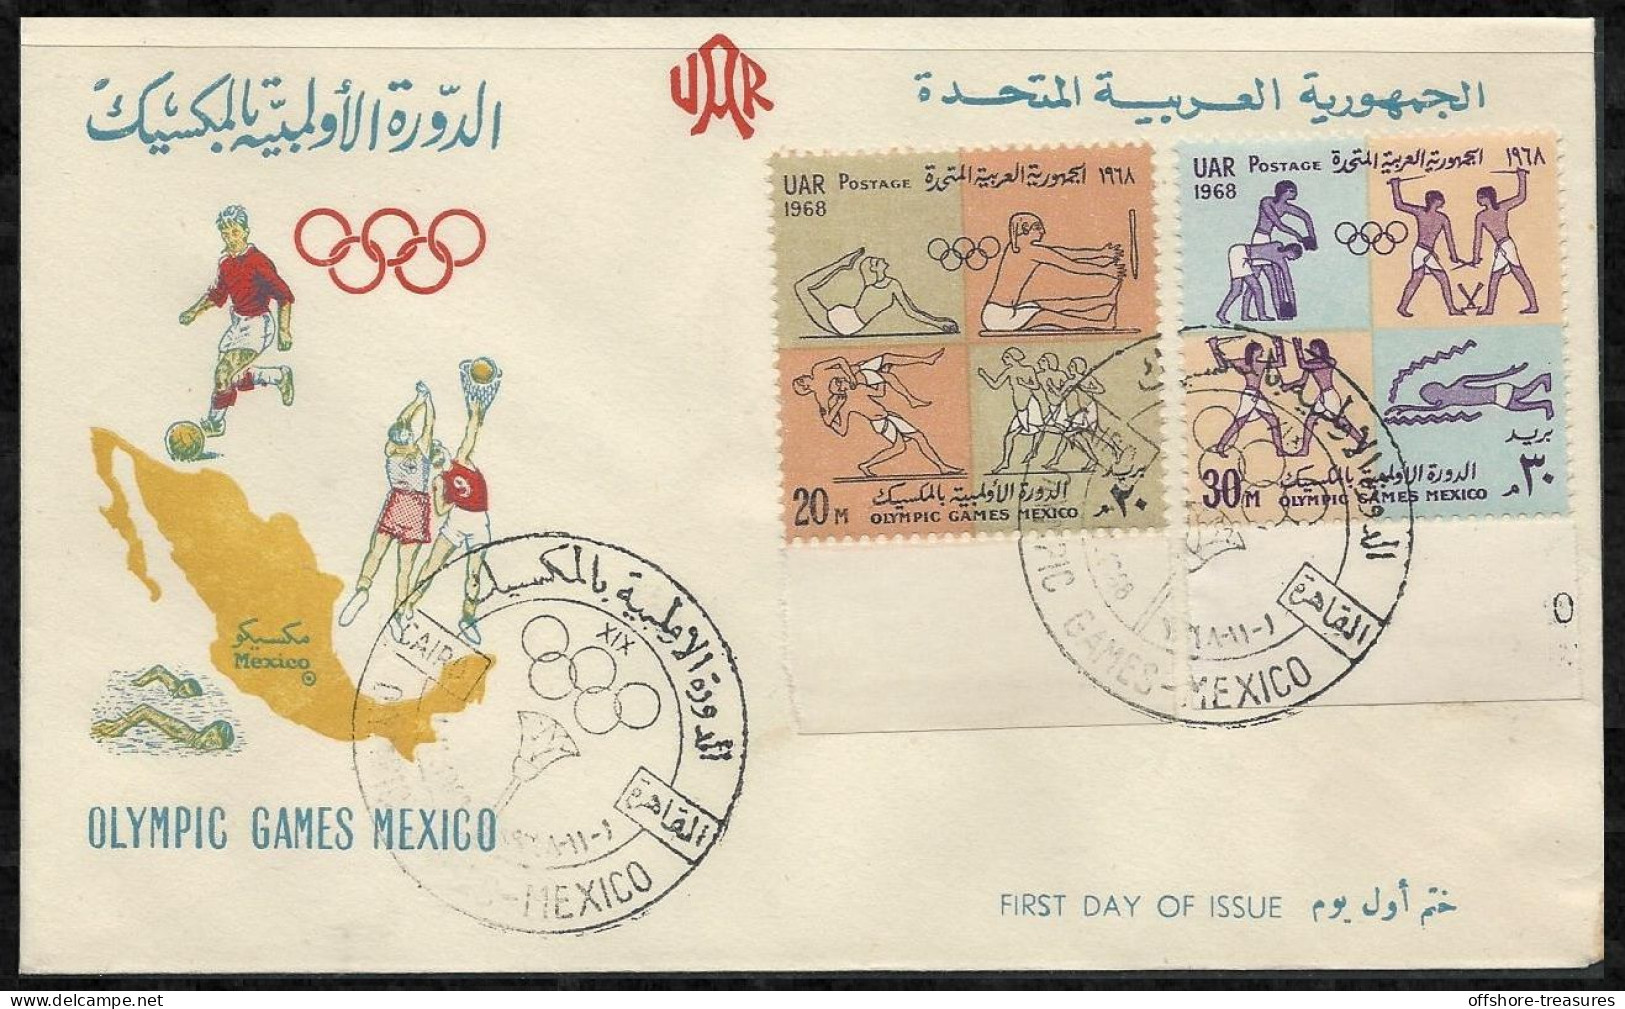 Egypt UAR POSTAGE 1968 Olympic Games Mexico FDC / First Day Cover - Nuevos